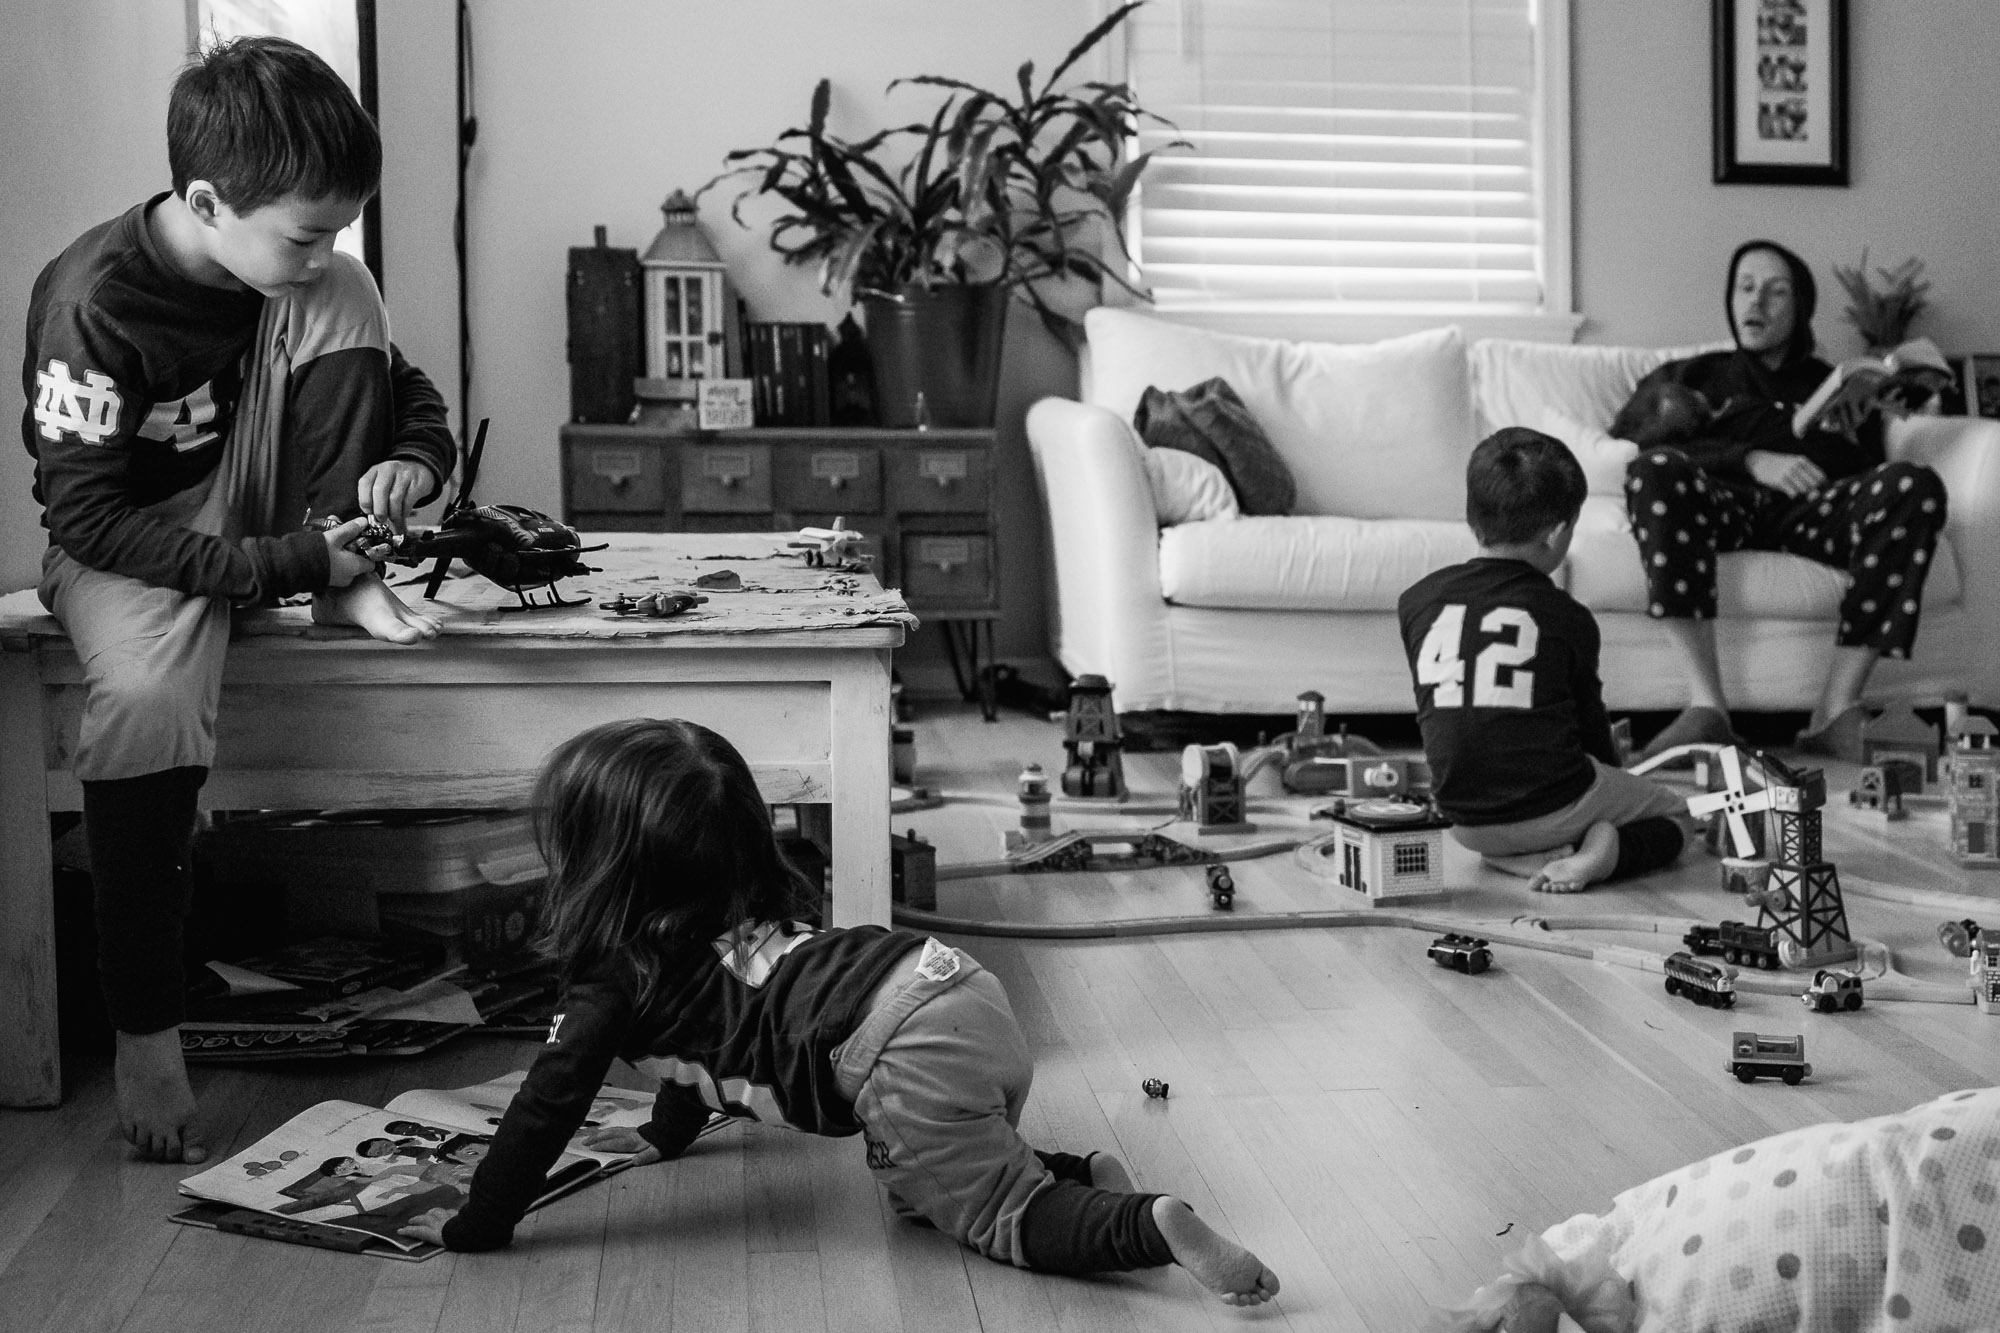 Children playing in living room